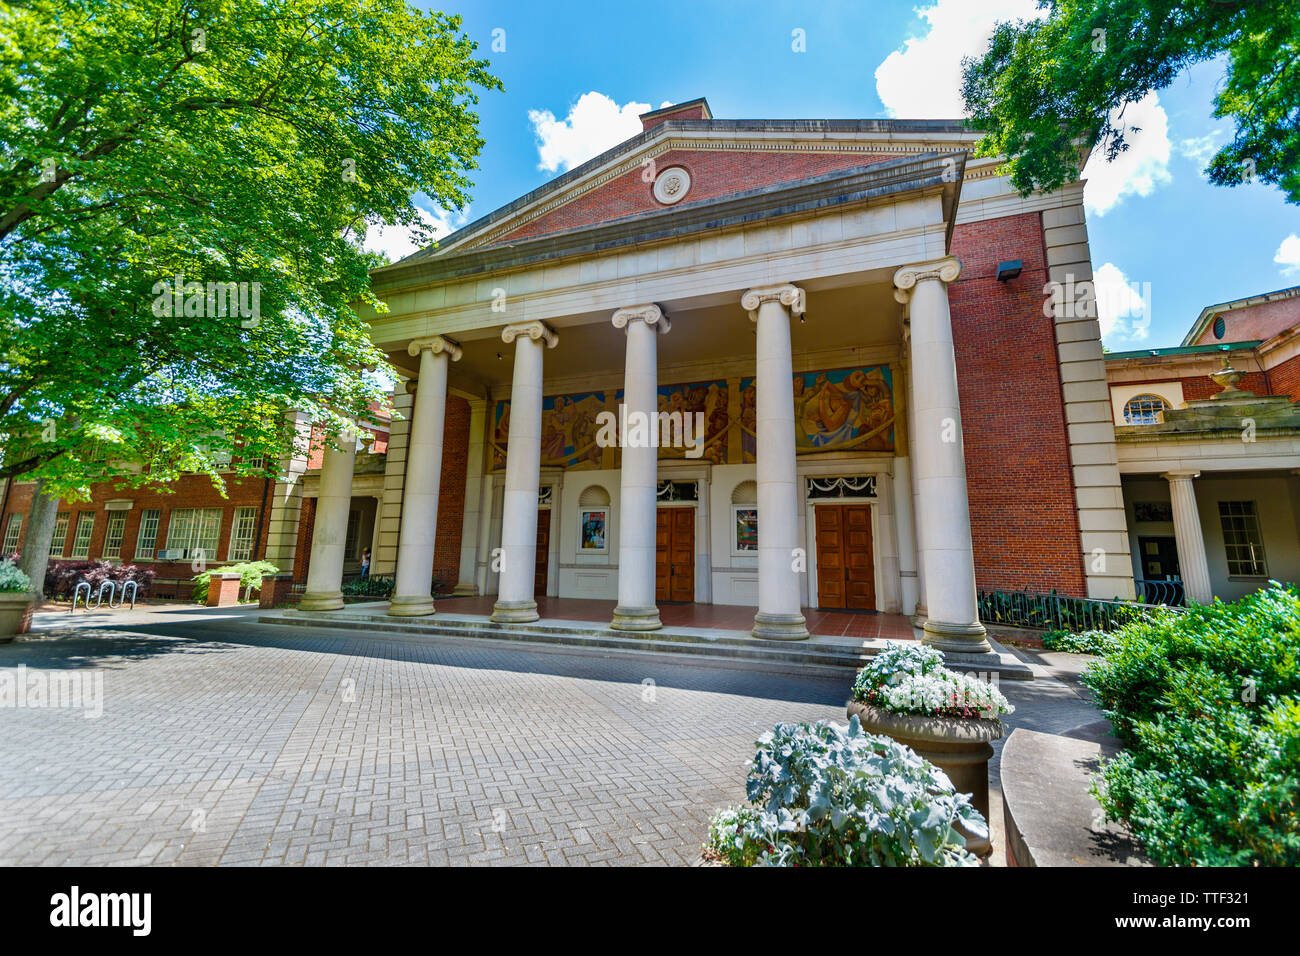 ATHENS, GA, USA - May 3: Fine Arts Building on May 3, 2019 at the University of Georgia in Athens, Georgia. Stock Photo